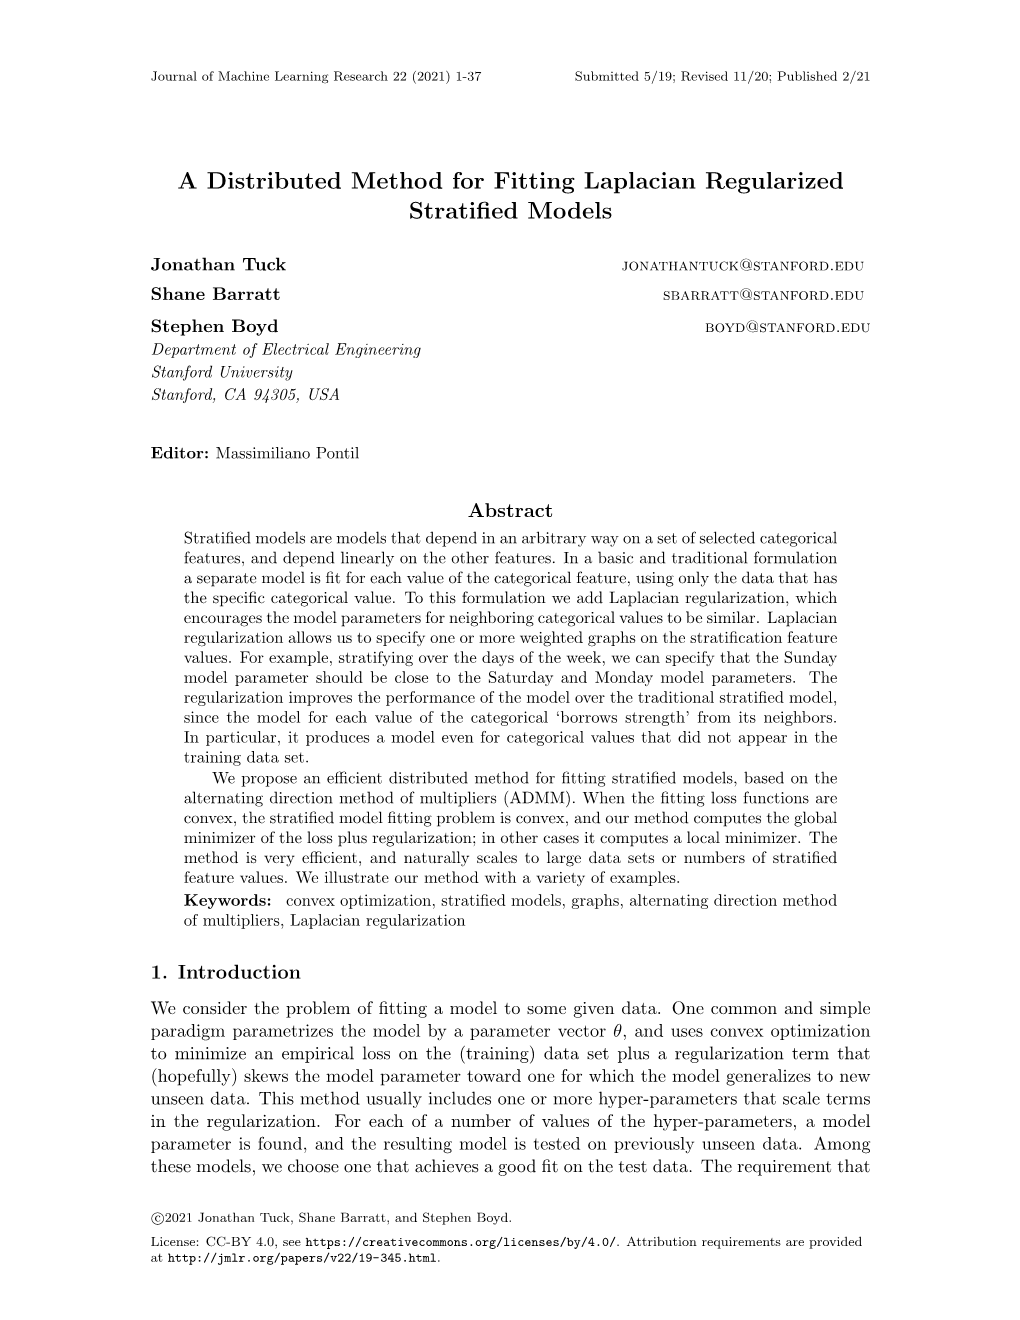 A Distributed Method for Fitting Laplacian Regularized Stratified Models